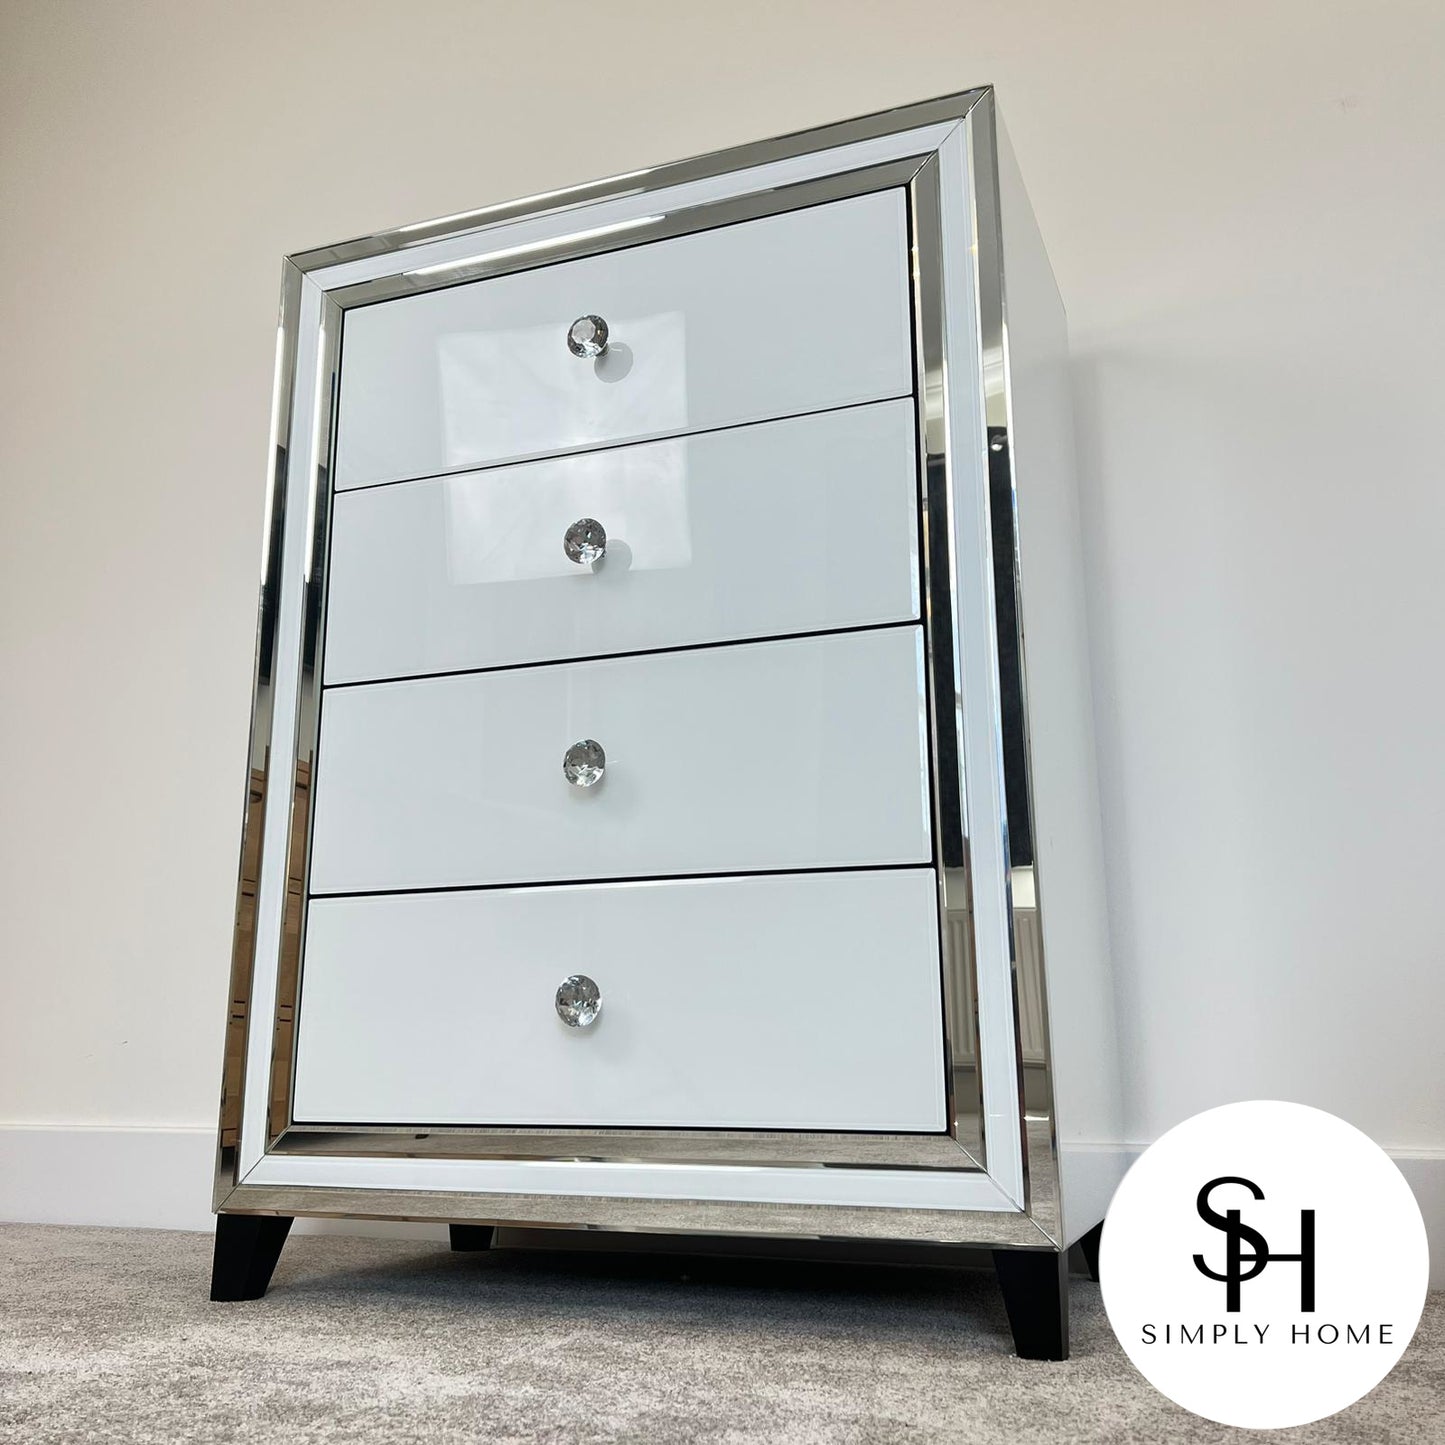 4 Drawer Tall White Mirrored Chest of Drawers